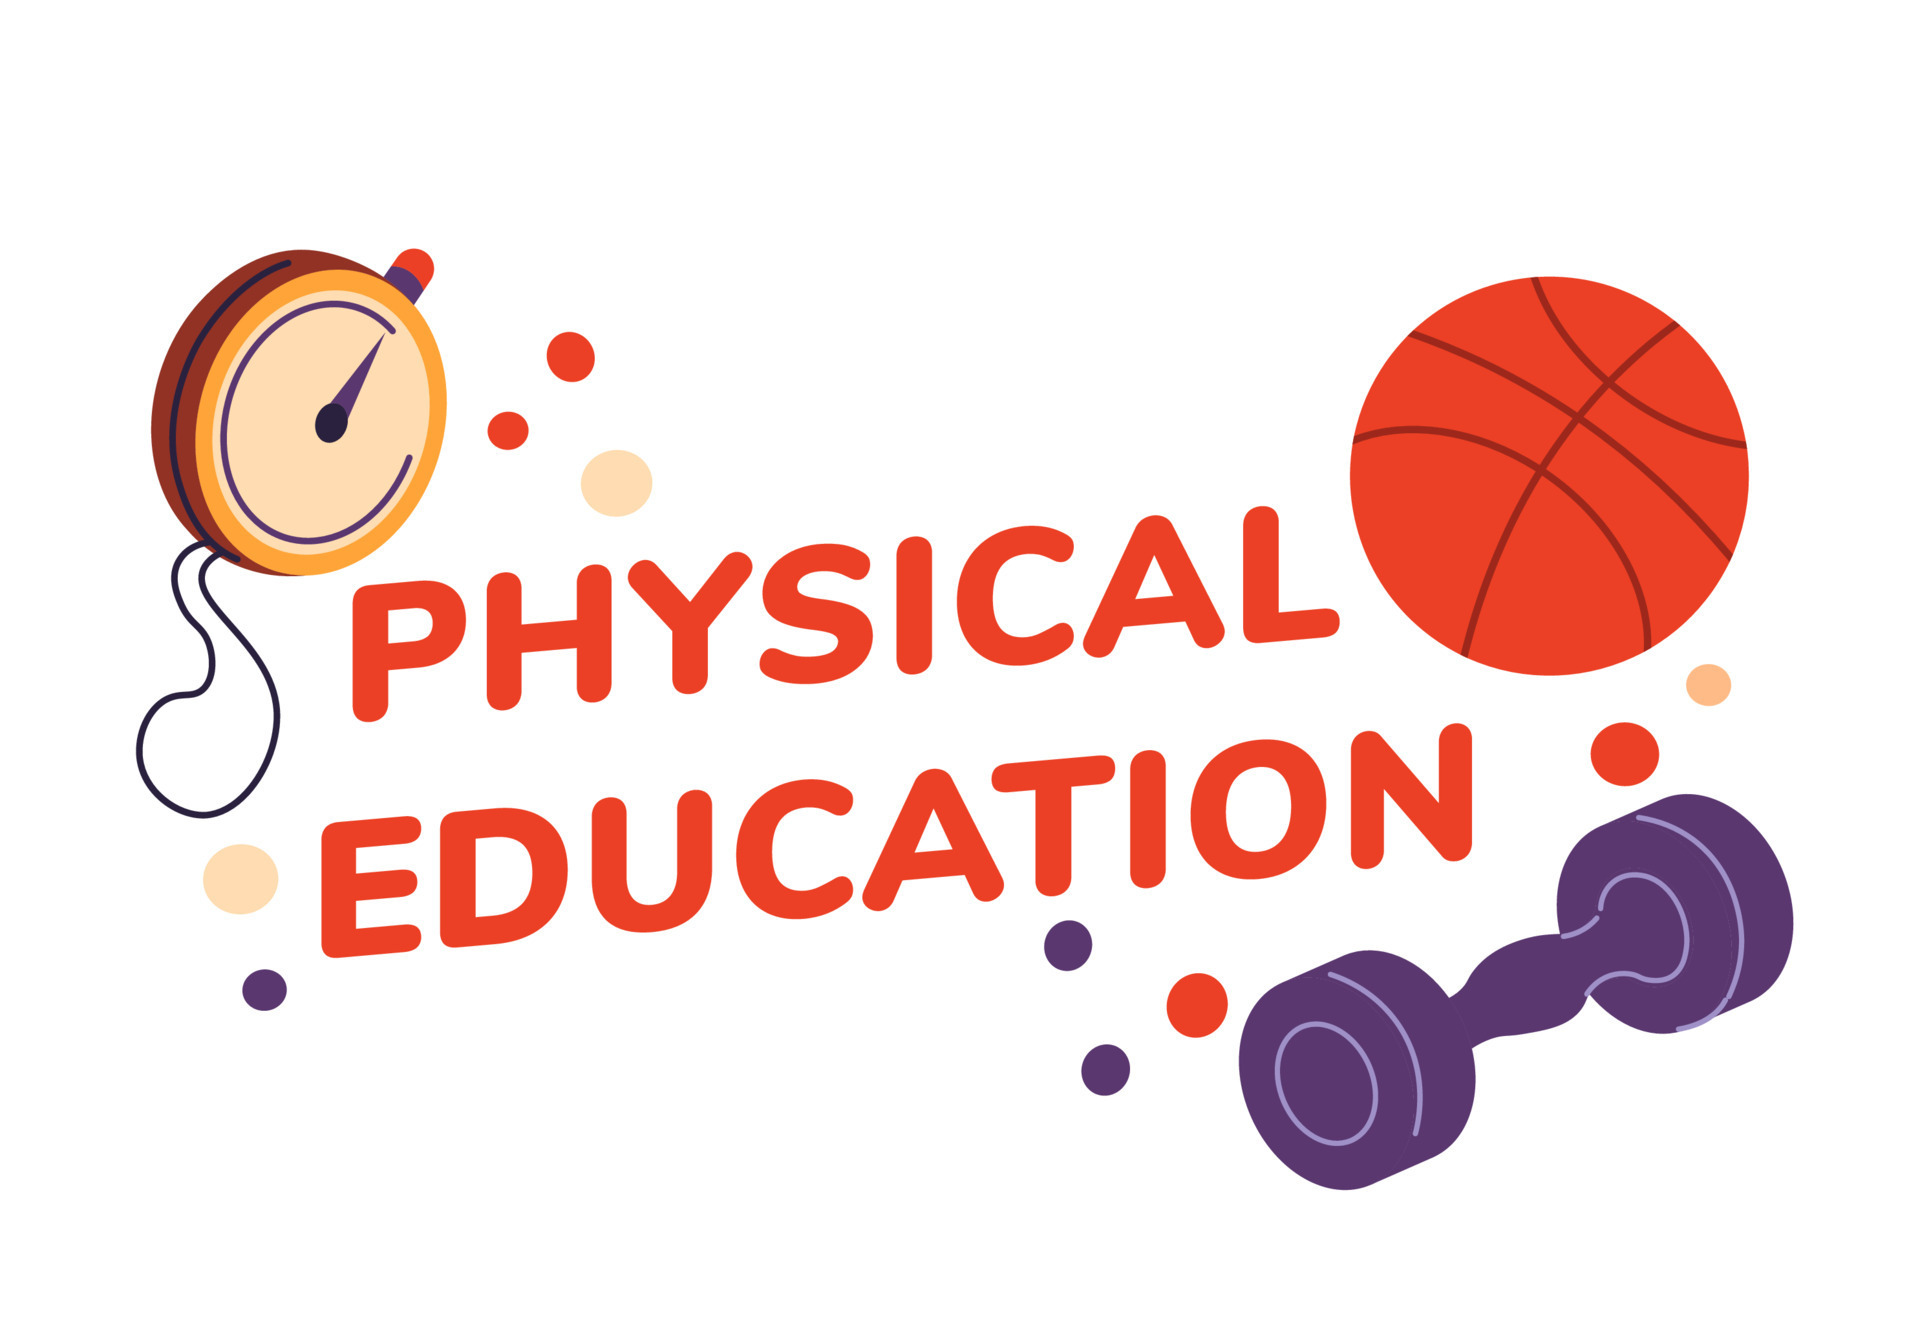 Physical education lessons at school, discipline 24029037 Vector